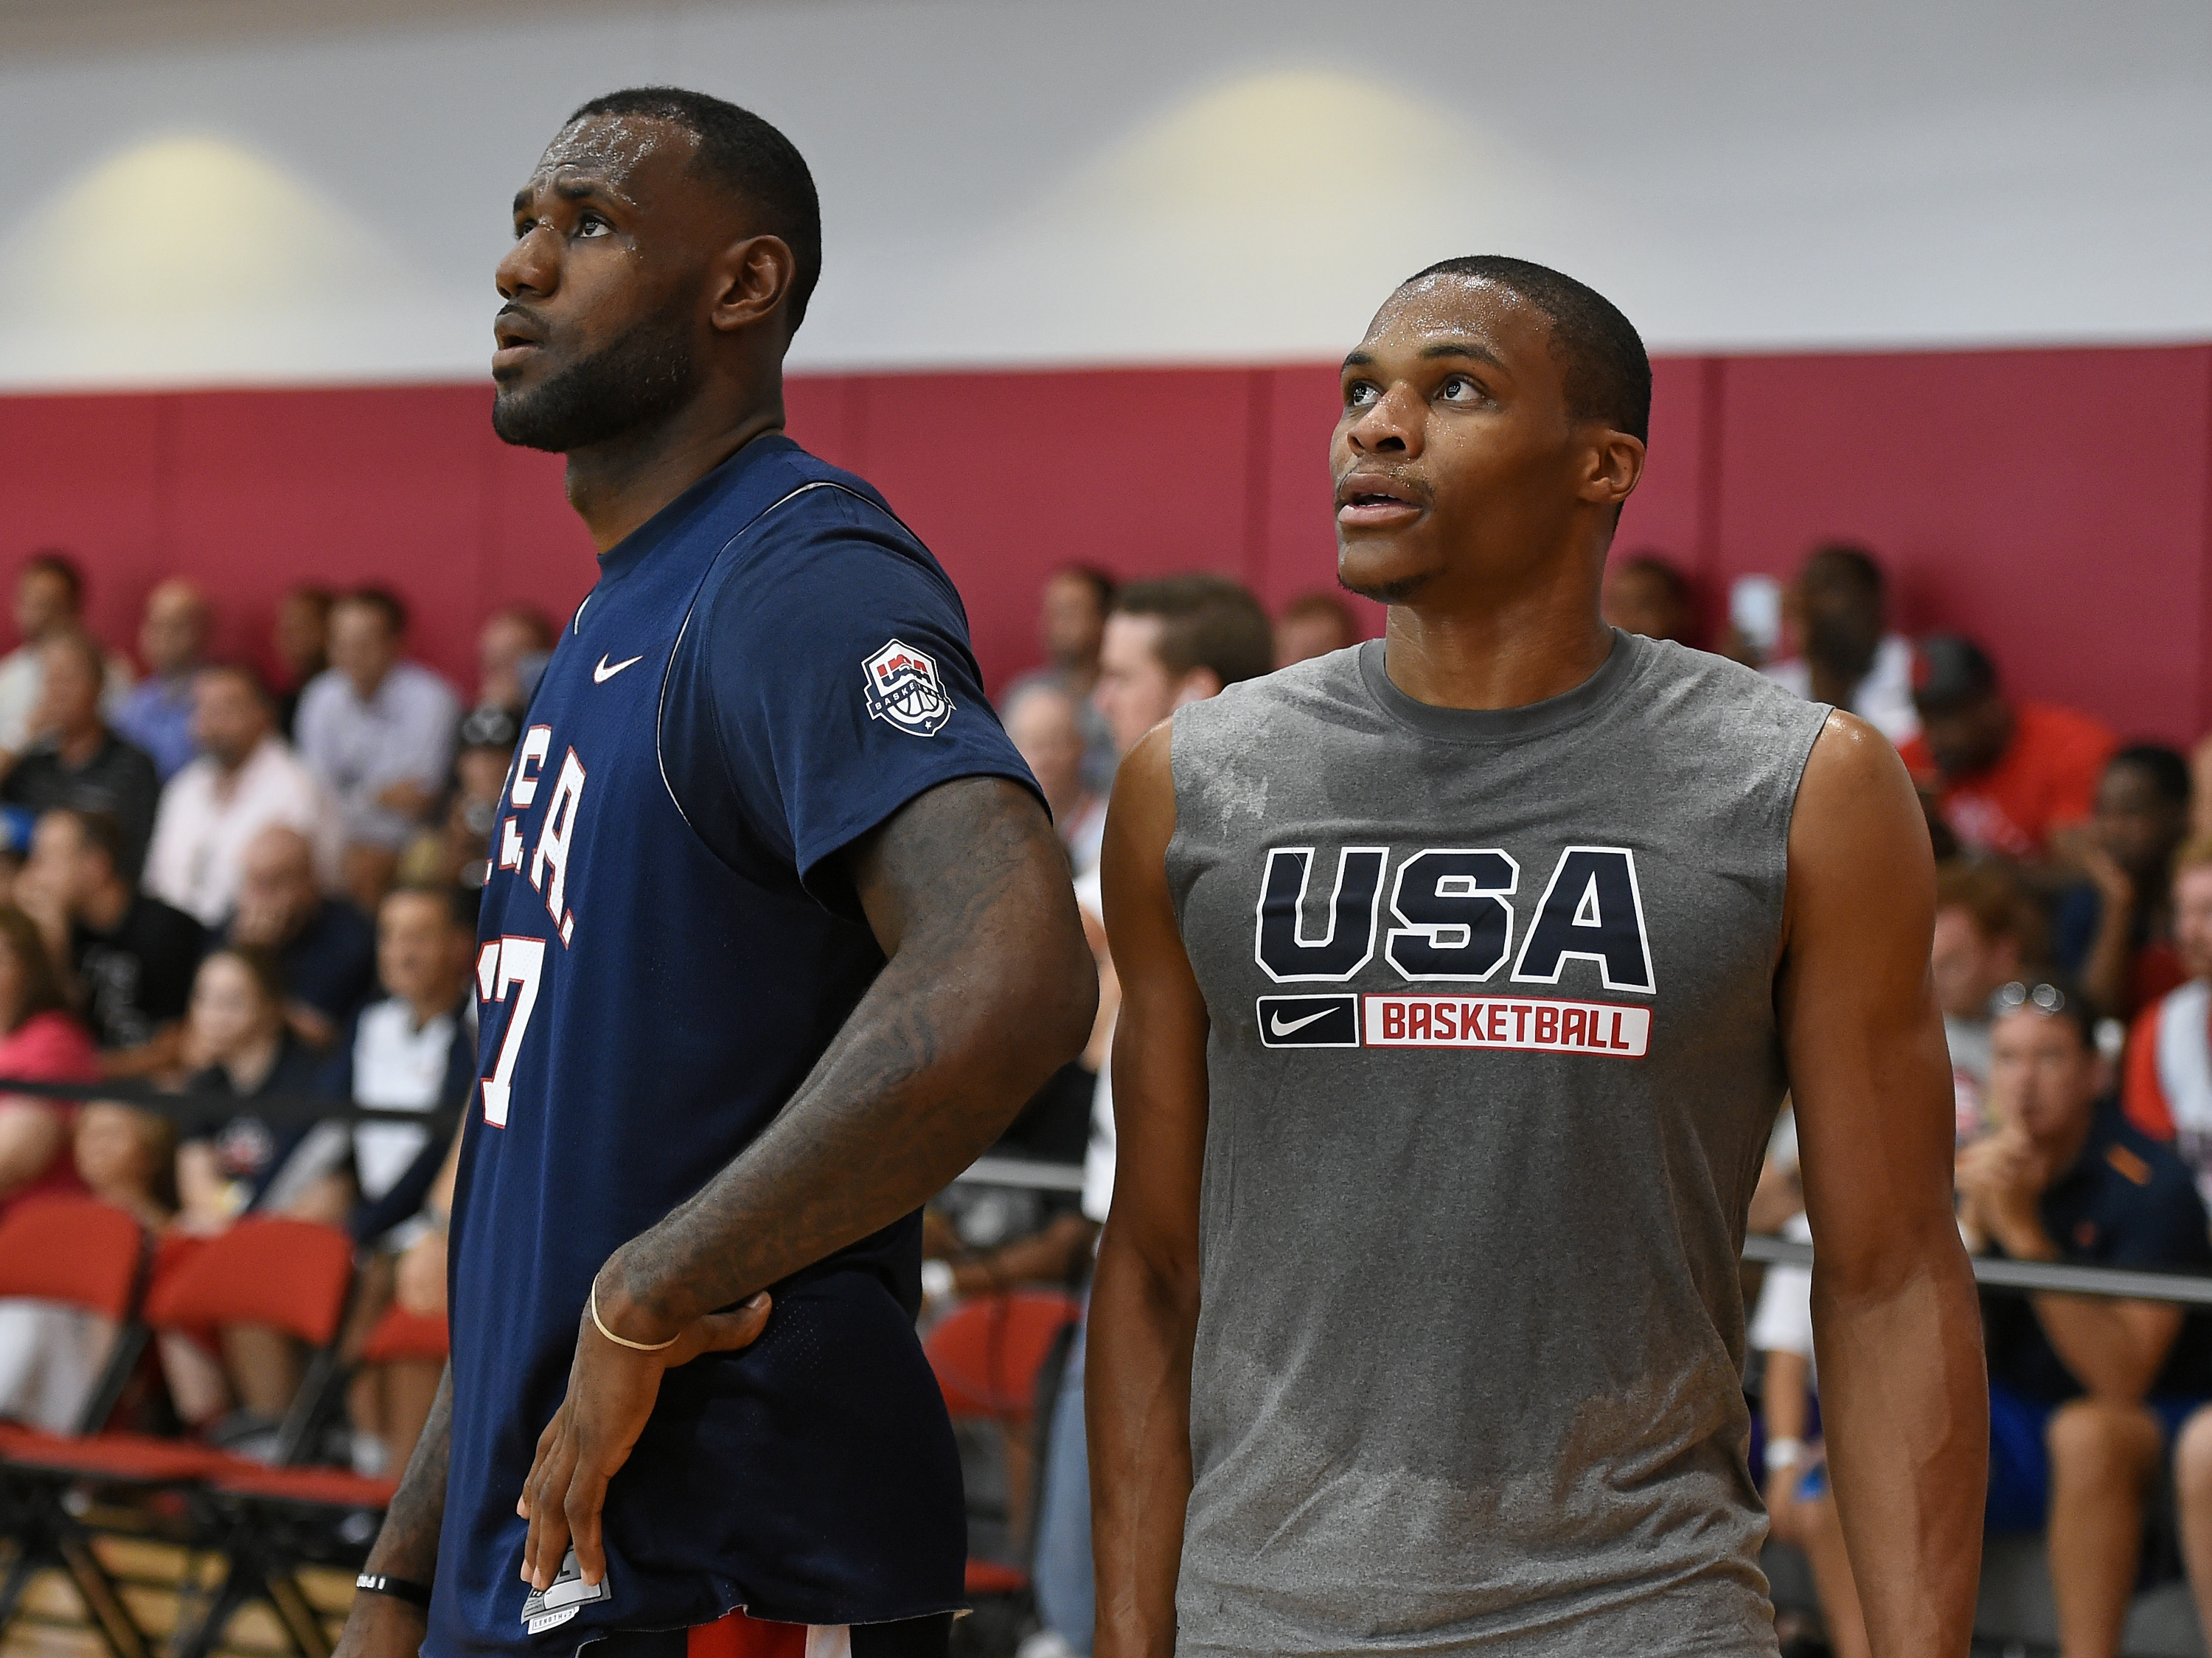 LeBron James, Russell Westbrook at Lakers' summer league, but no